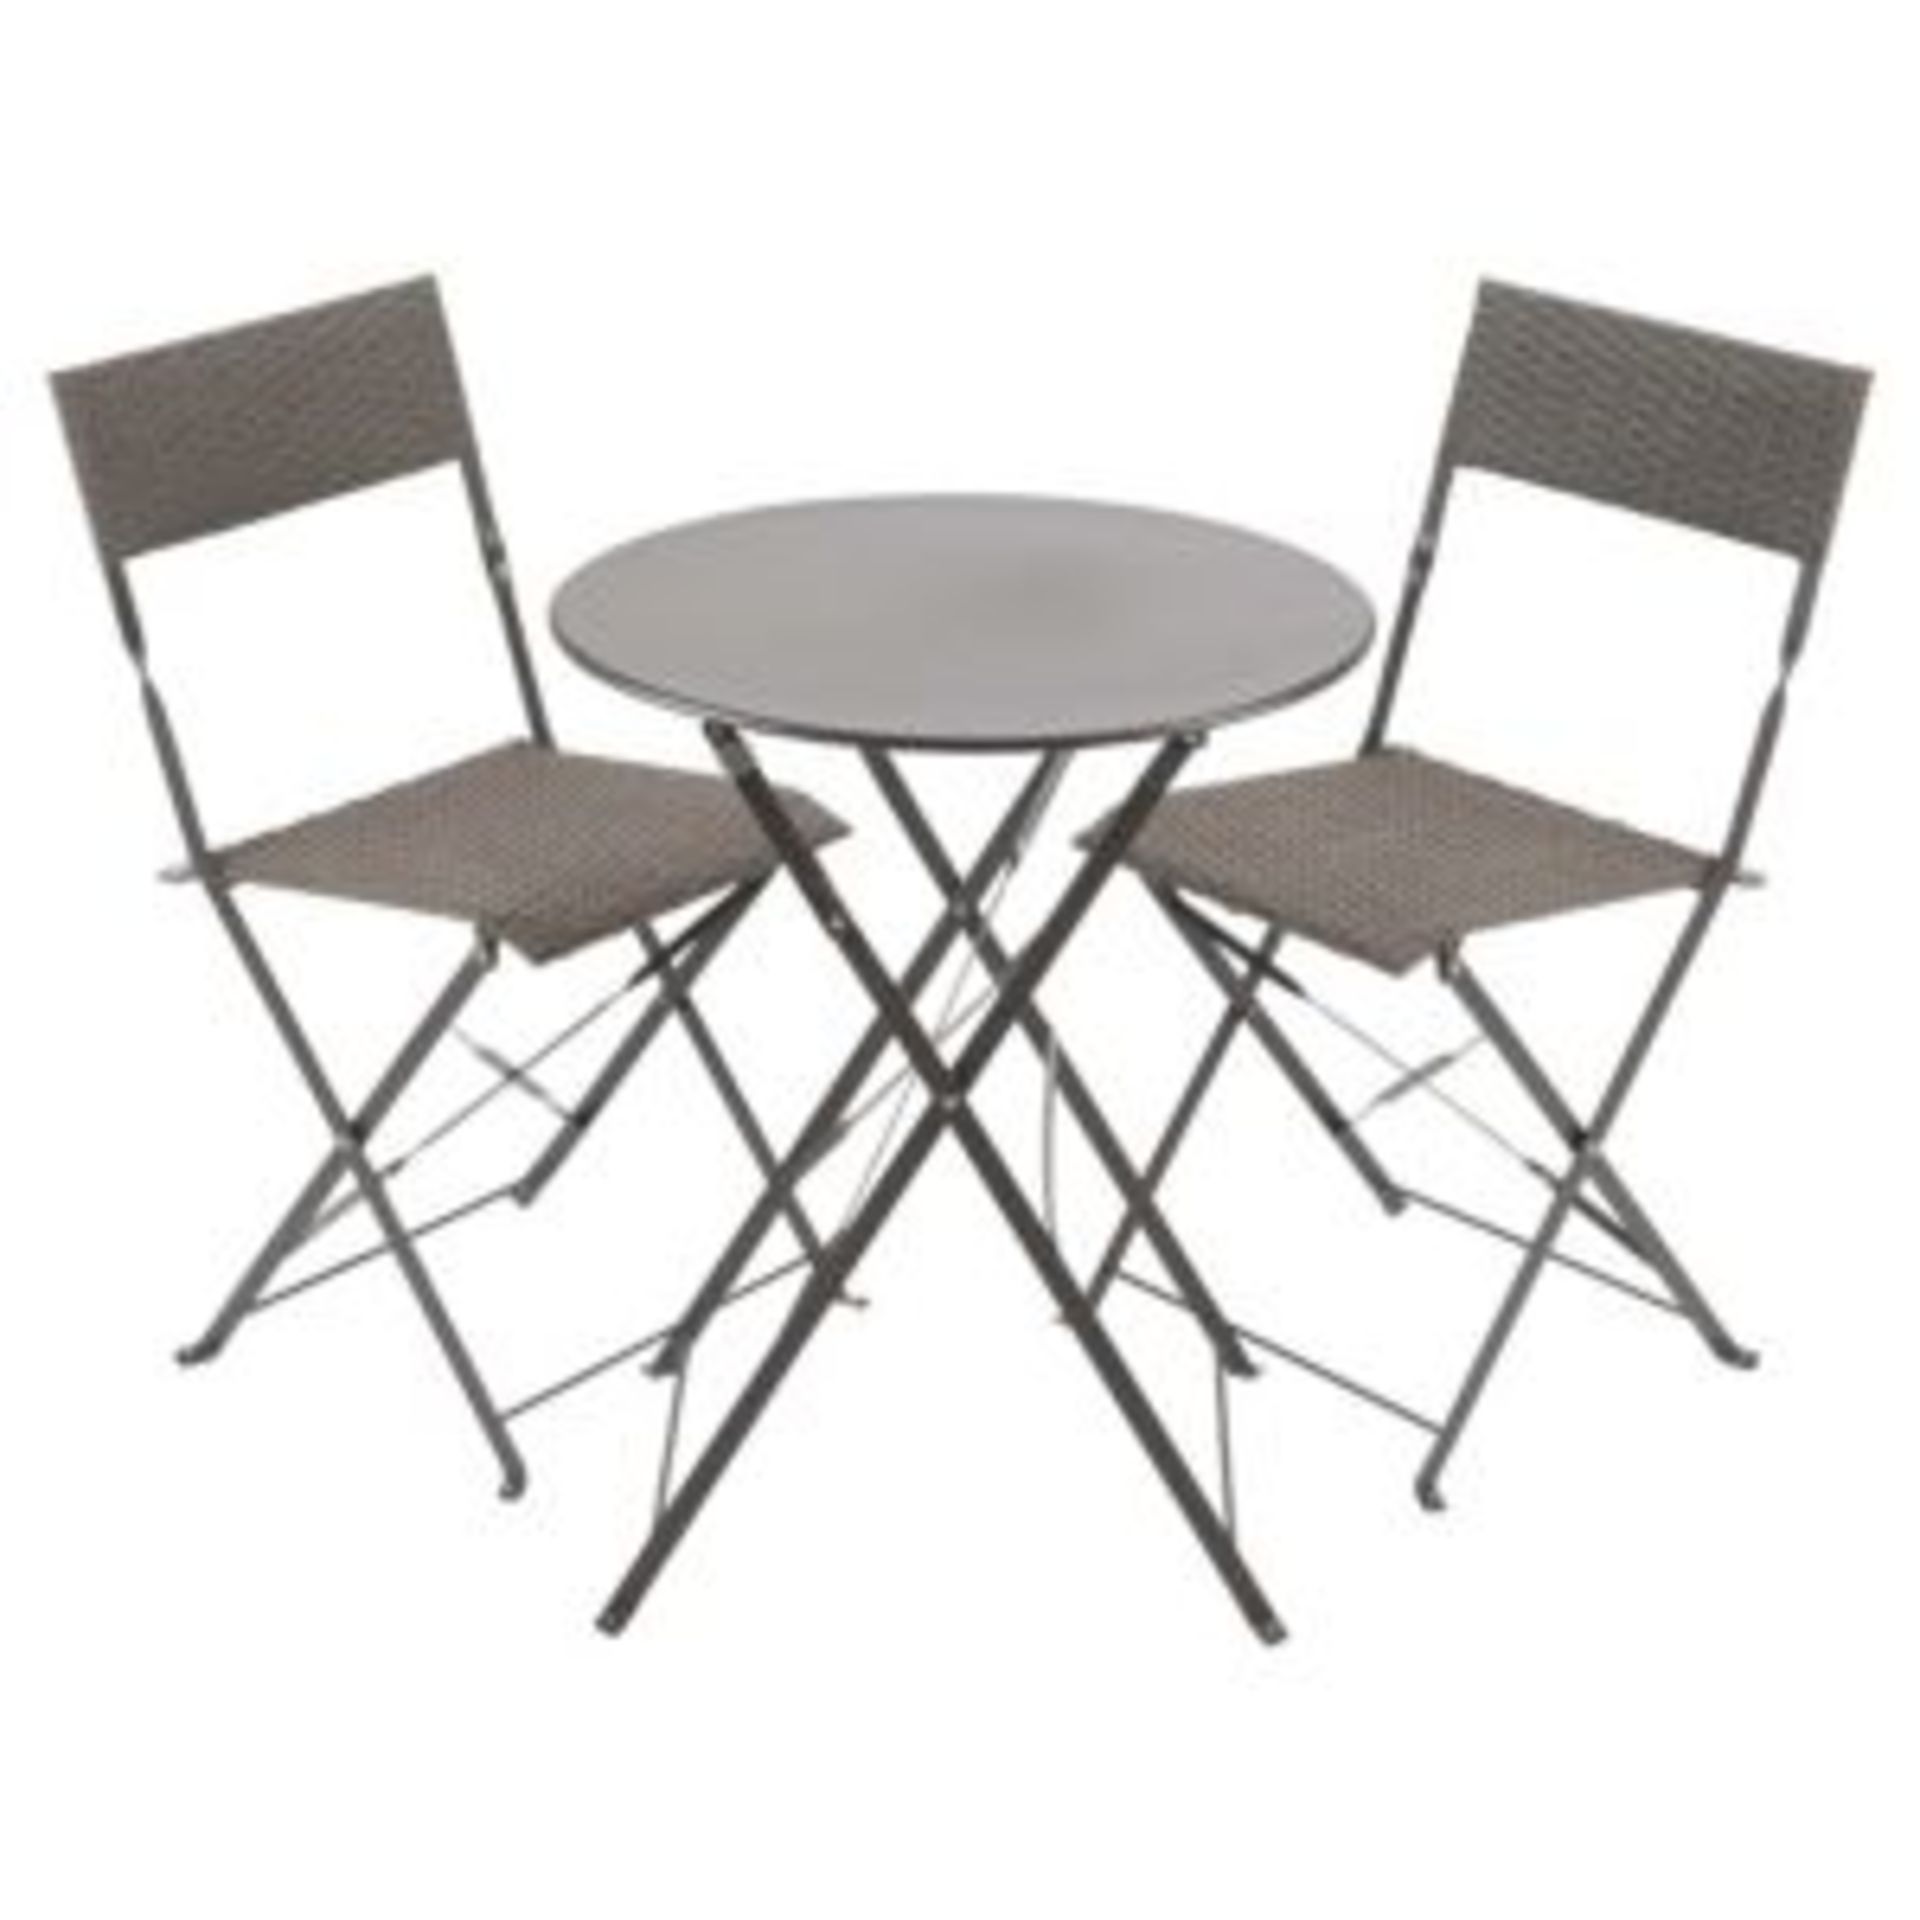 V Brand New Atlas Rattan Folding Bistro Set - Metal Table - Two Chairs - ISP £91.99 - Image 4 of 4